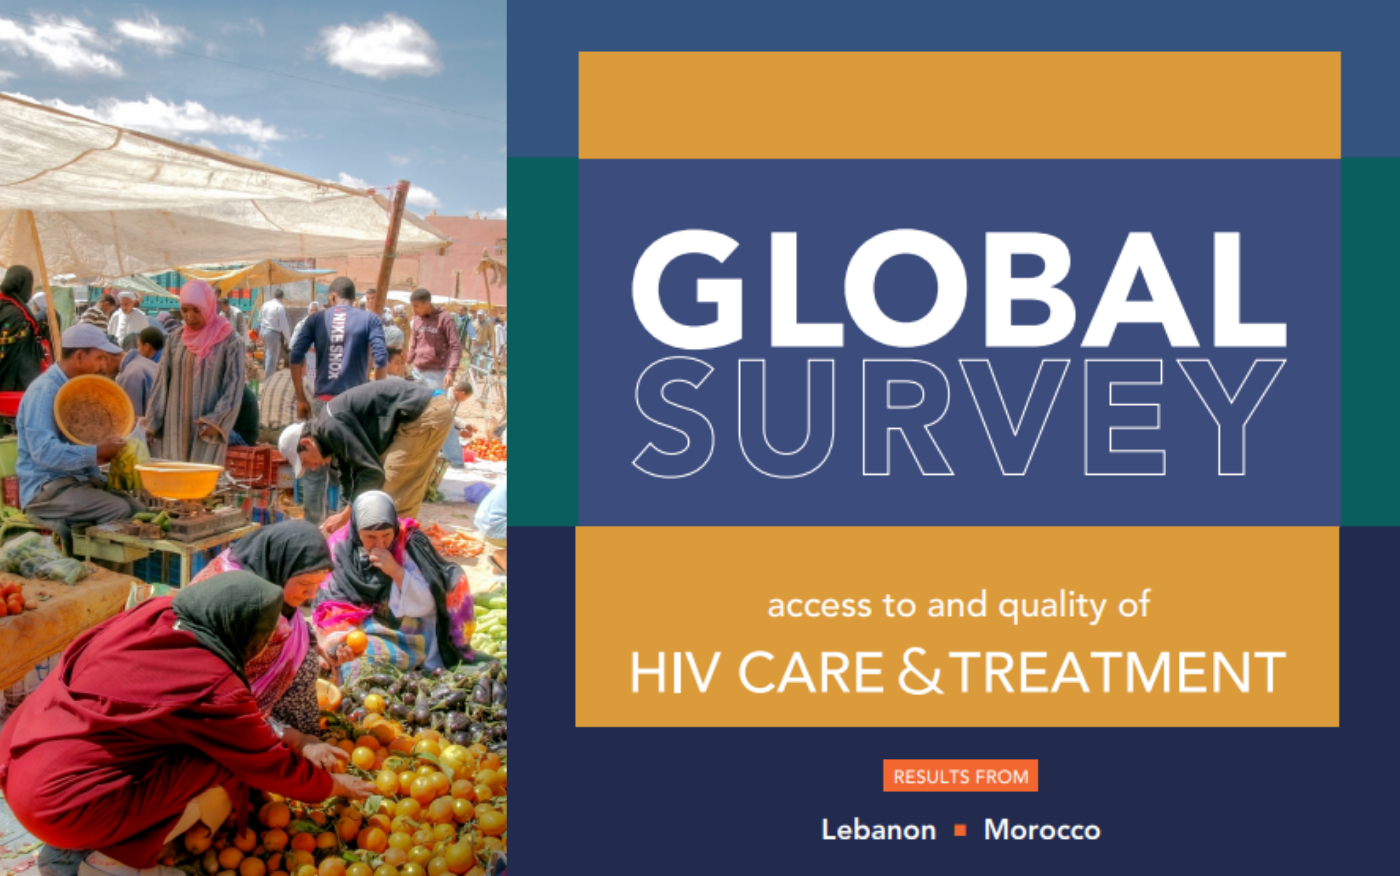 Global survey access to and quality of HIV care and treatment - MENA (Lebanon and Morocco)